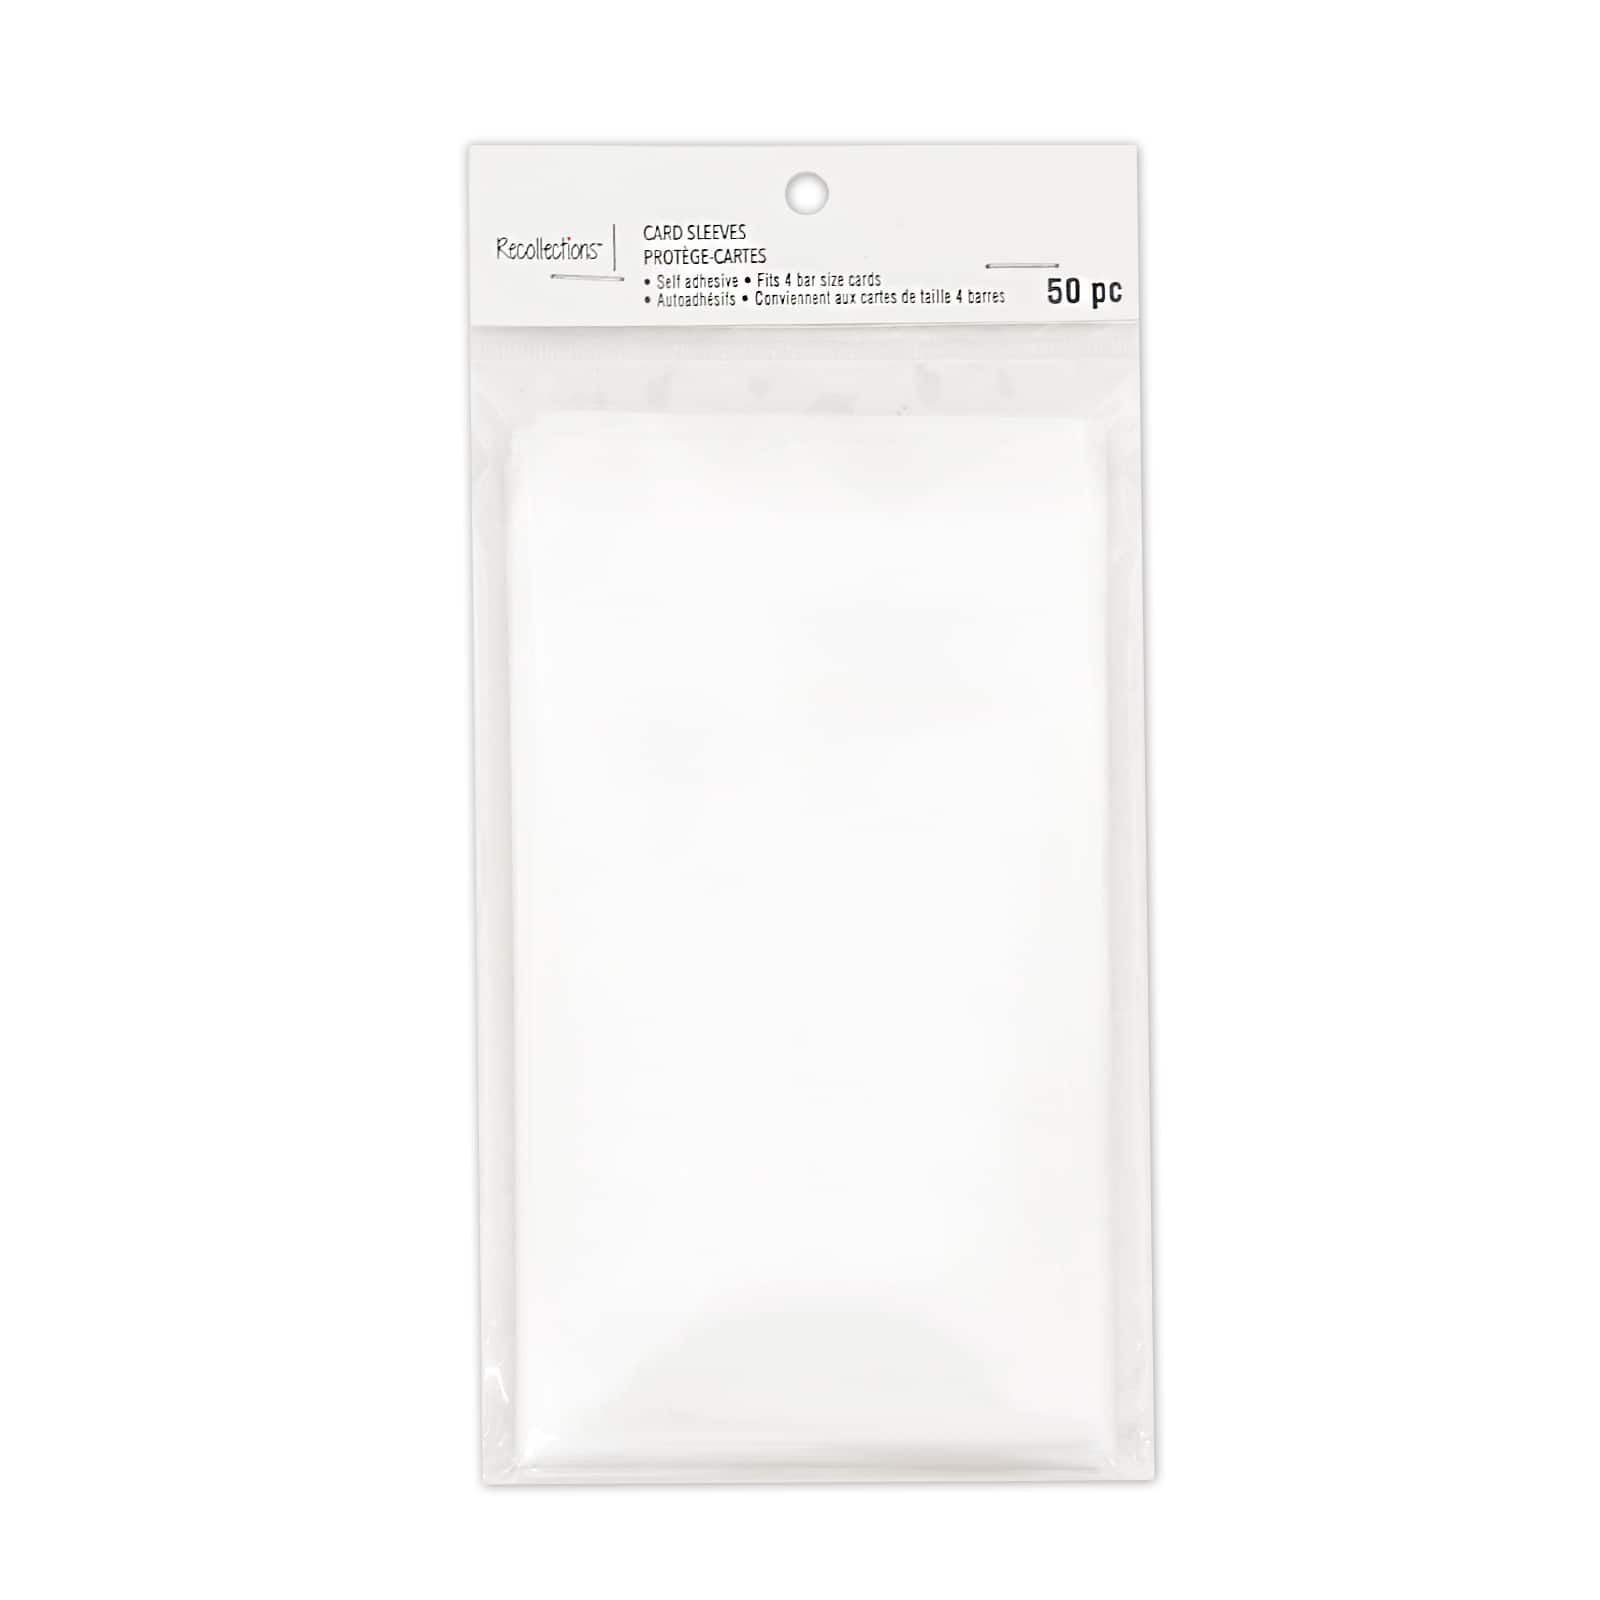 Clear Plastic Sleeves